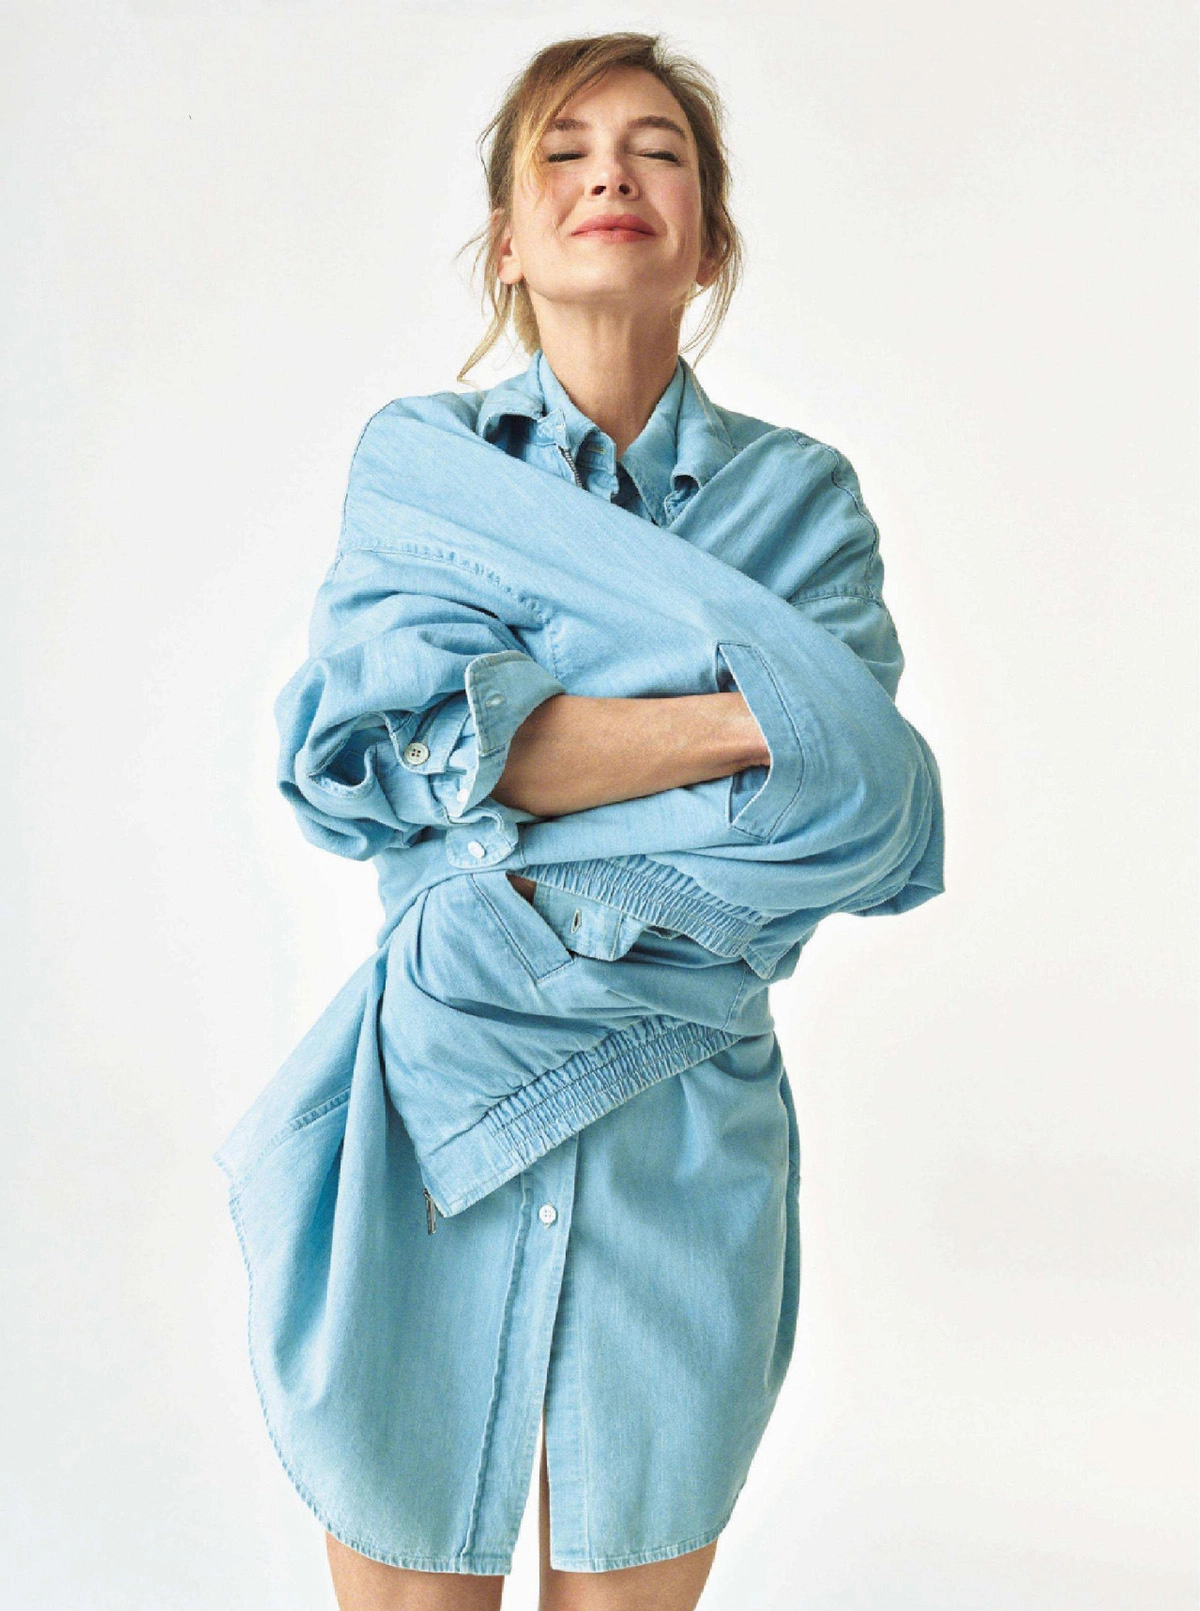 Renée Zellweger covers The Sunday Times Style August 7th, 2022 by Pamela Hanson